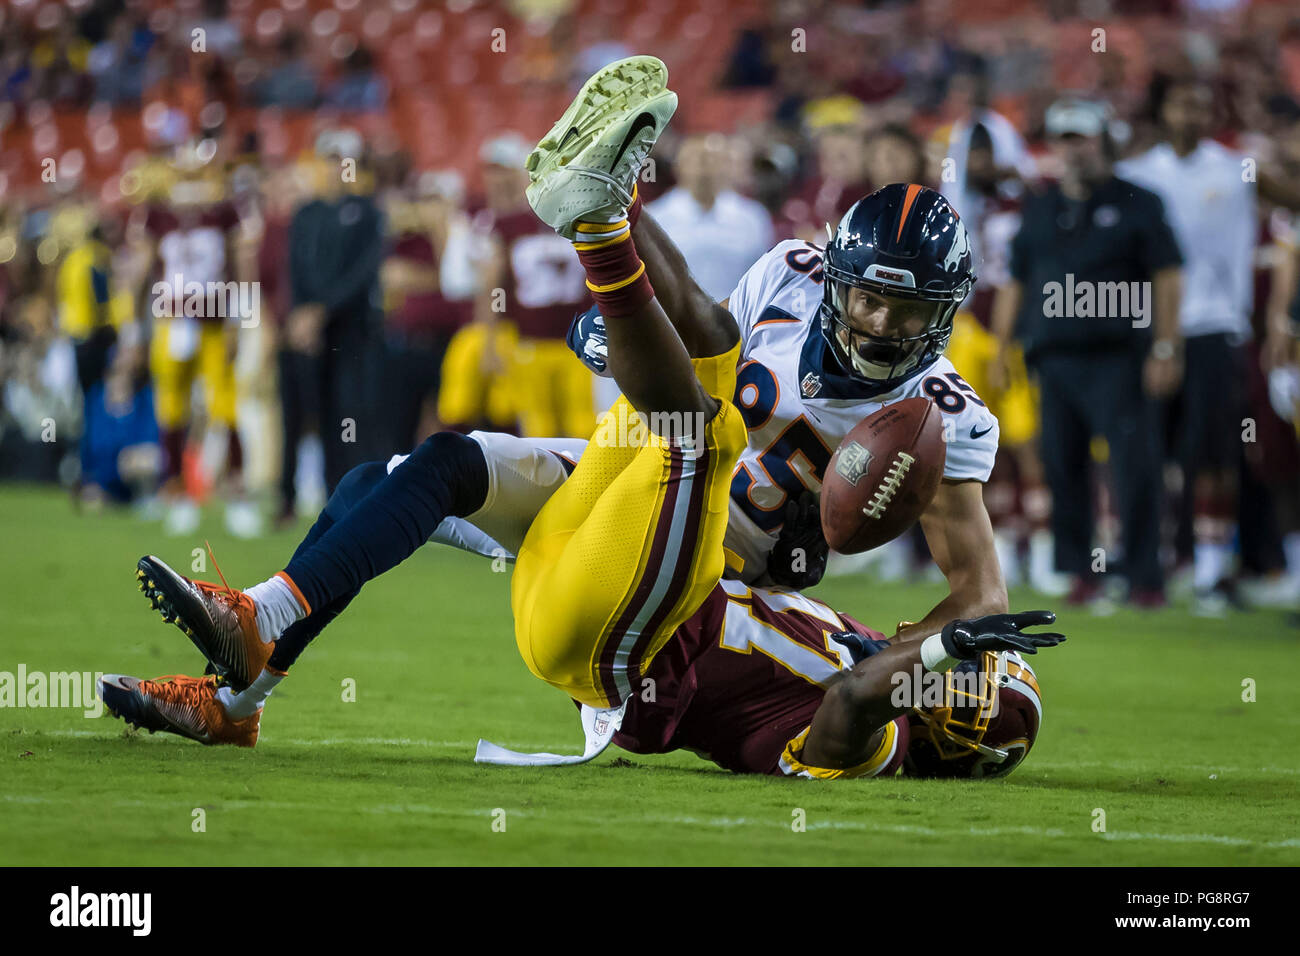 Landover, USA. August 24, 2018: Washington Redskins cornerback Prince Charles Iworah (47) breaks up a pass intended for Denver Broncos wide receiver Mark Chapman (85) during the NFL preseason game between the Denver Broncos and the Washington Redskins at FedExField in Landover, Maryland. Scott Taetsch/CSM Credit: Cal Sport Media/Alamy Live News Stock Photo